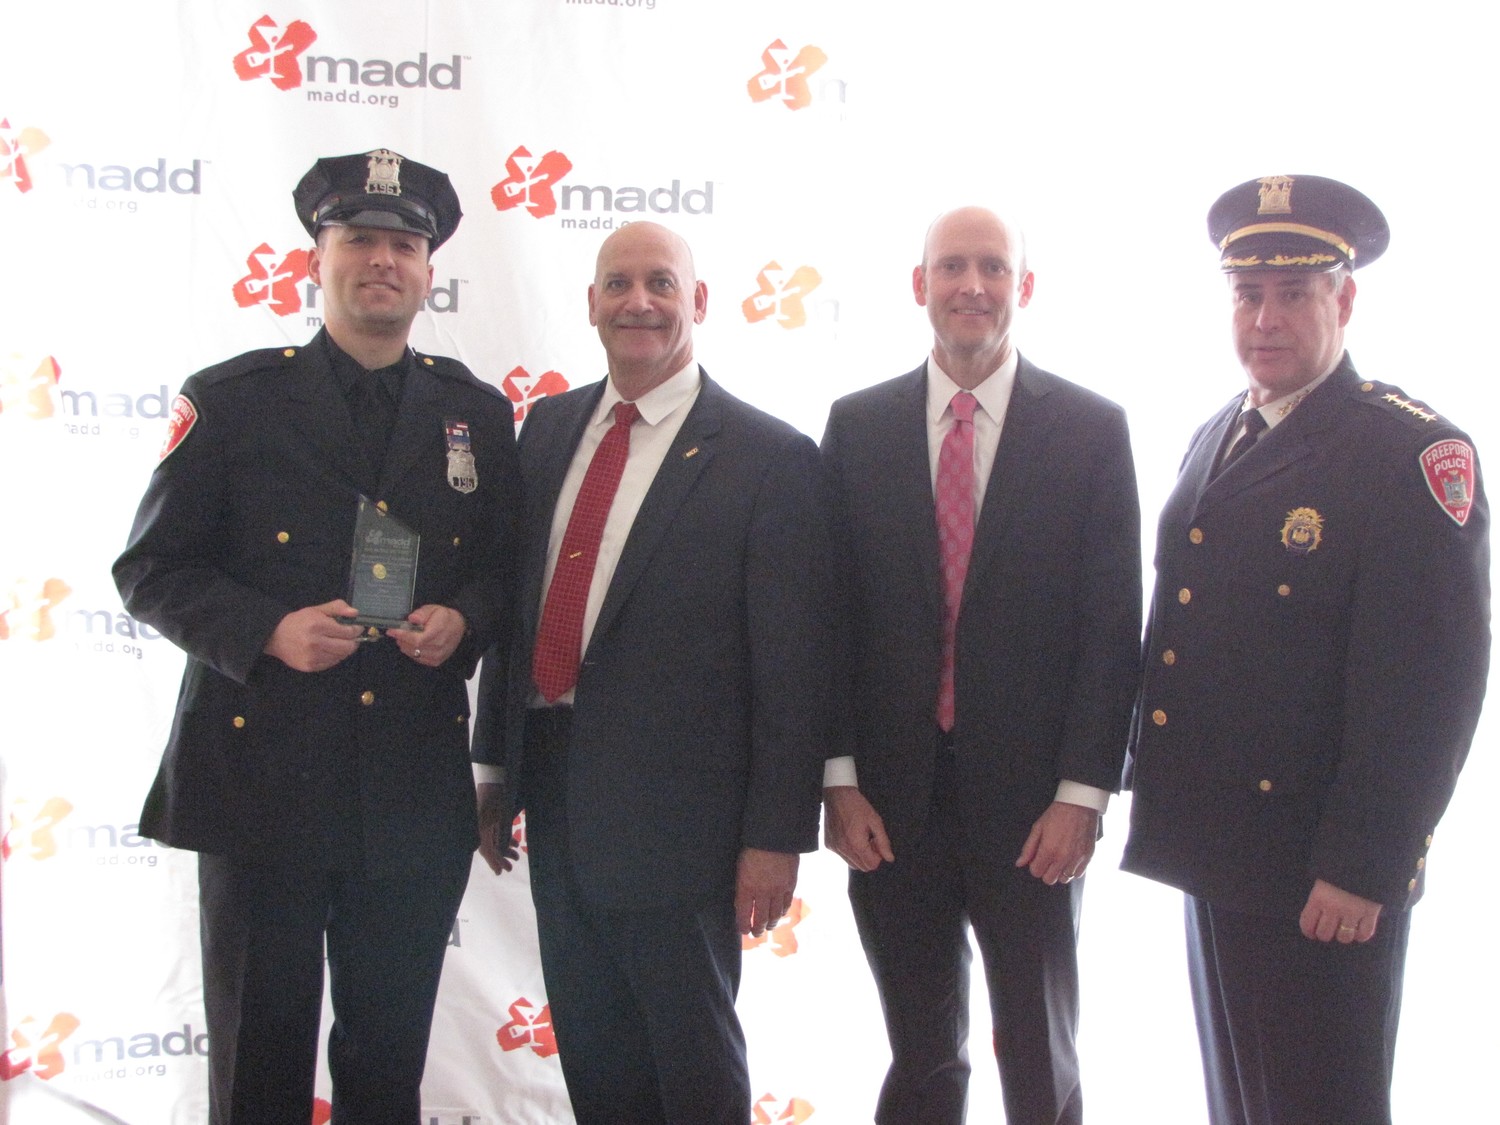 Freeport Police officer Alan Moreno, far left, accepted his award from MADD Executive State Director Richard Mallow, Chief Government Affairs Officer J.T. Griffin and Freeport Police Chief Miguel Bermudez.